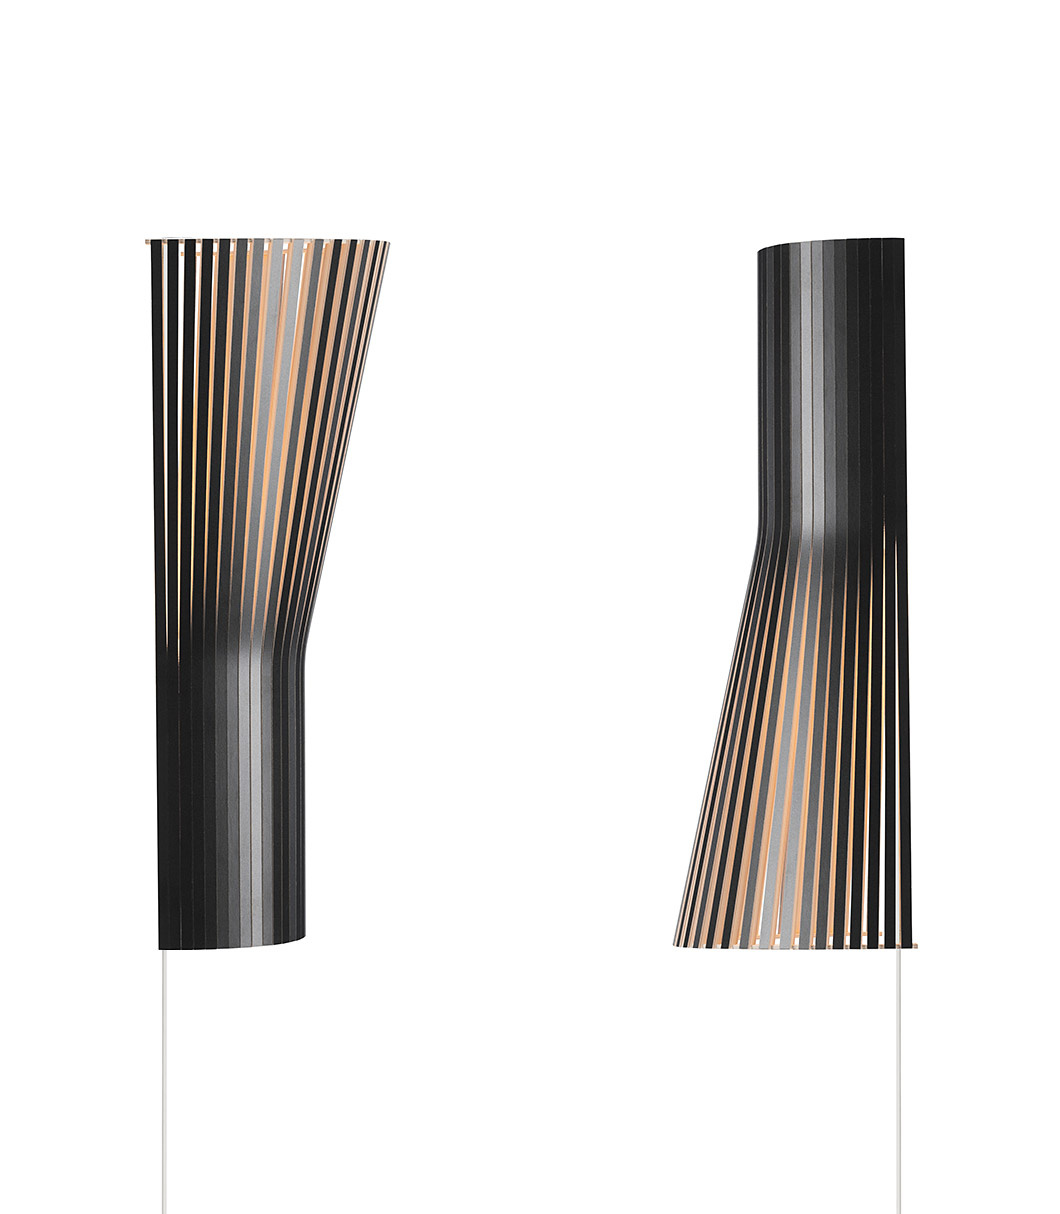 Secto Small 4231 wall lamp is available in black laminated